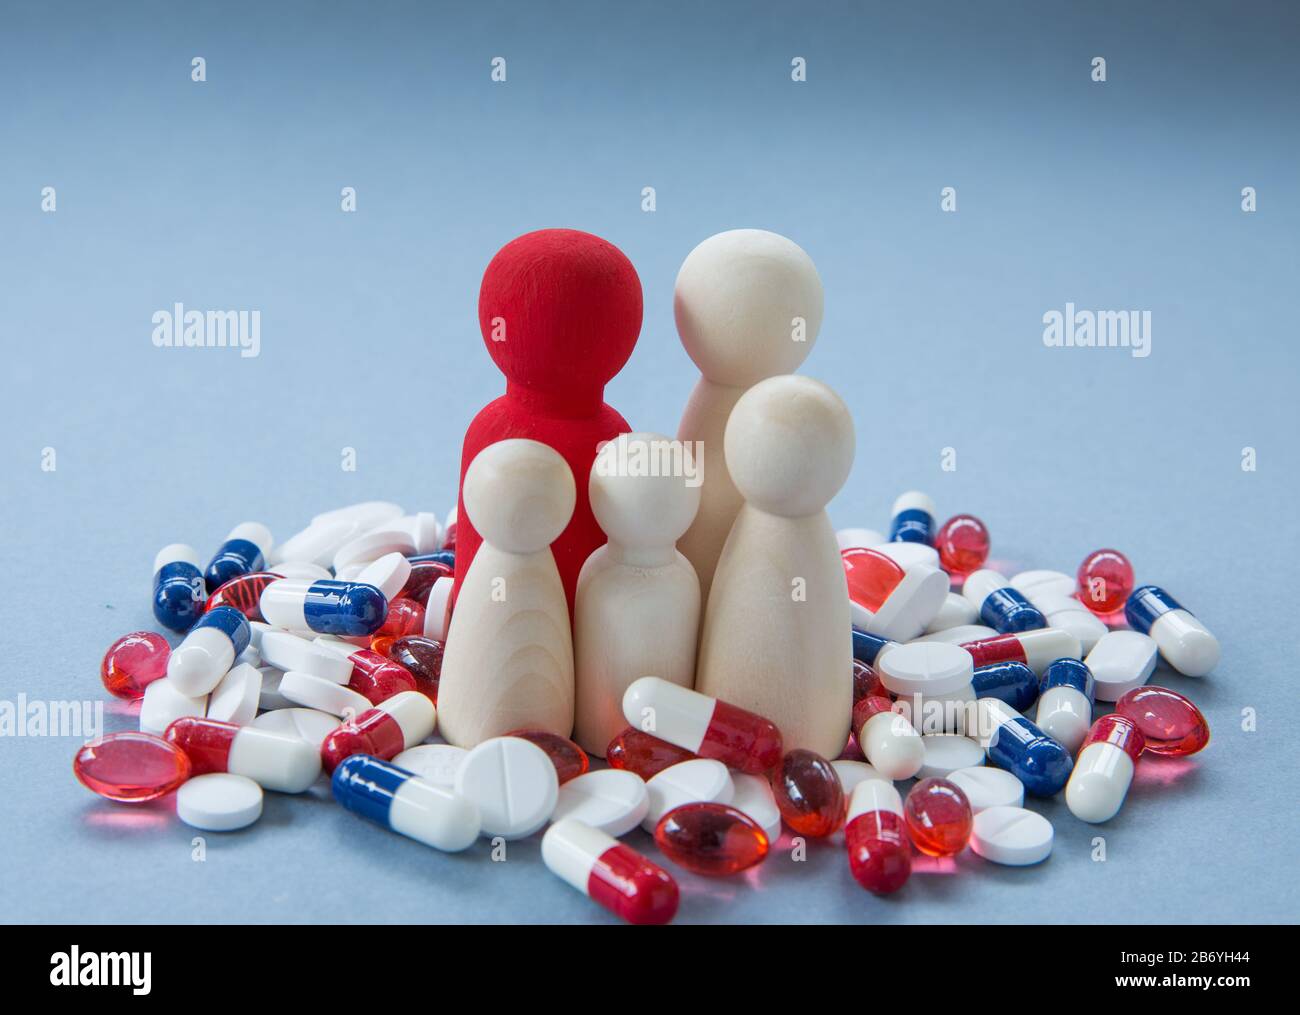 A concept of misuse and overuse of pills, tablets and drugs such as antibiotics, paracetamol and painkillers allowing antibiotic resistant drugs Stock Photo